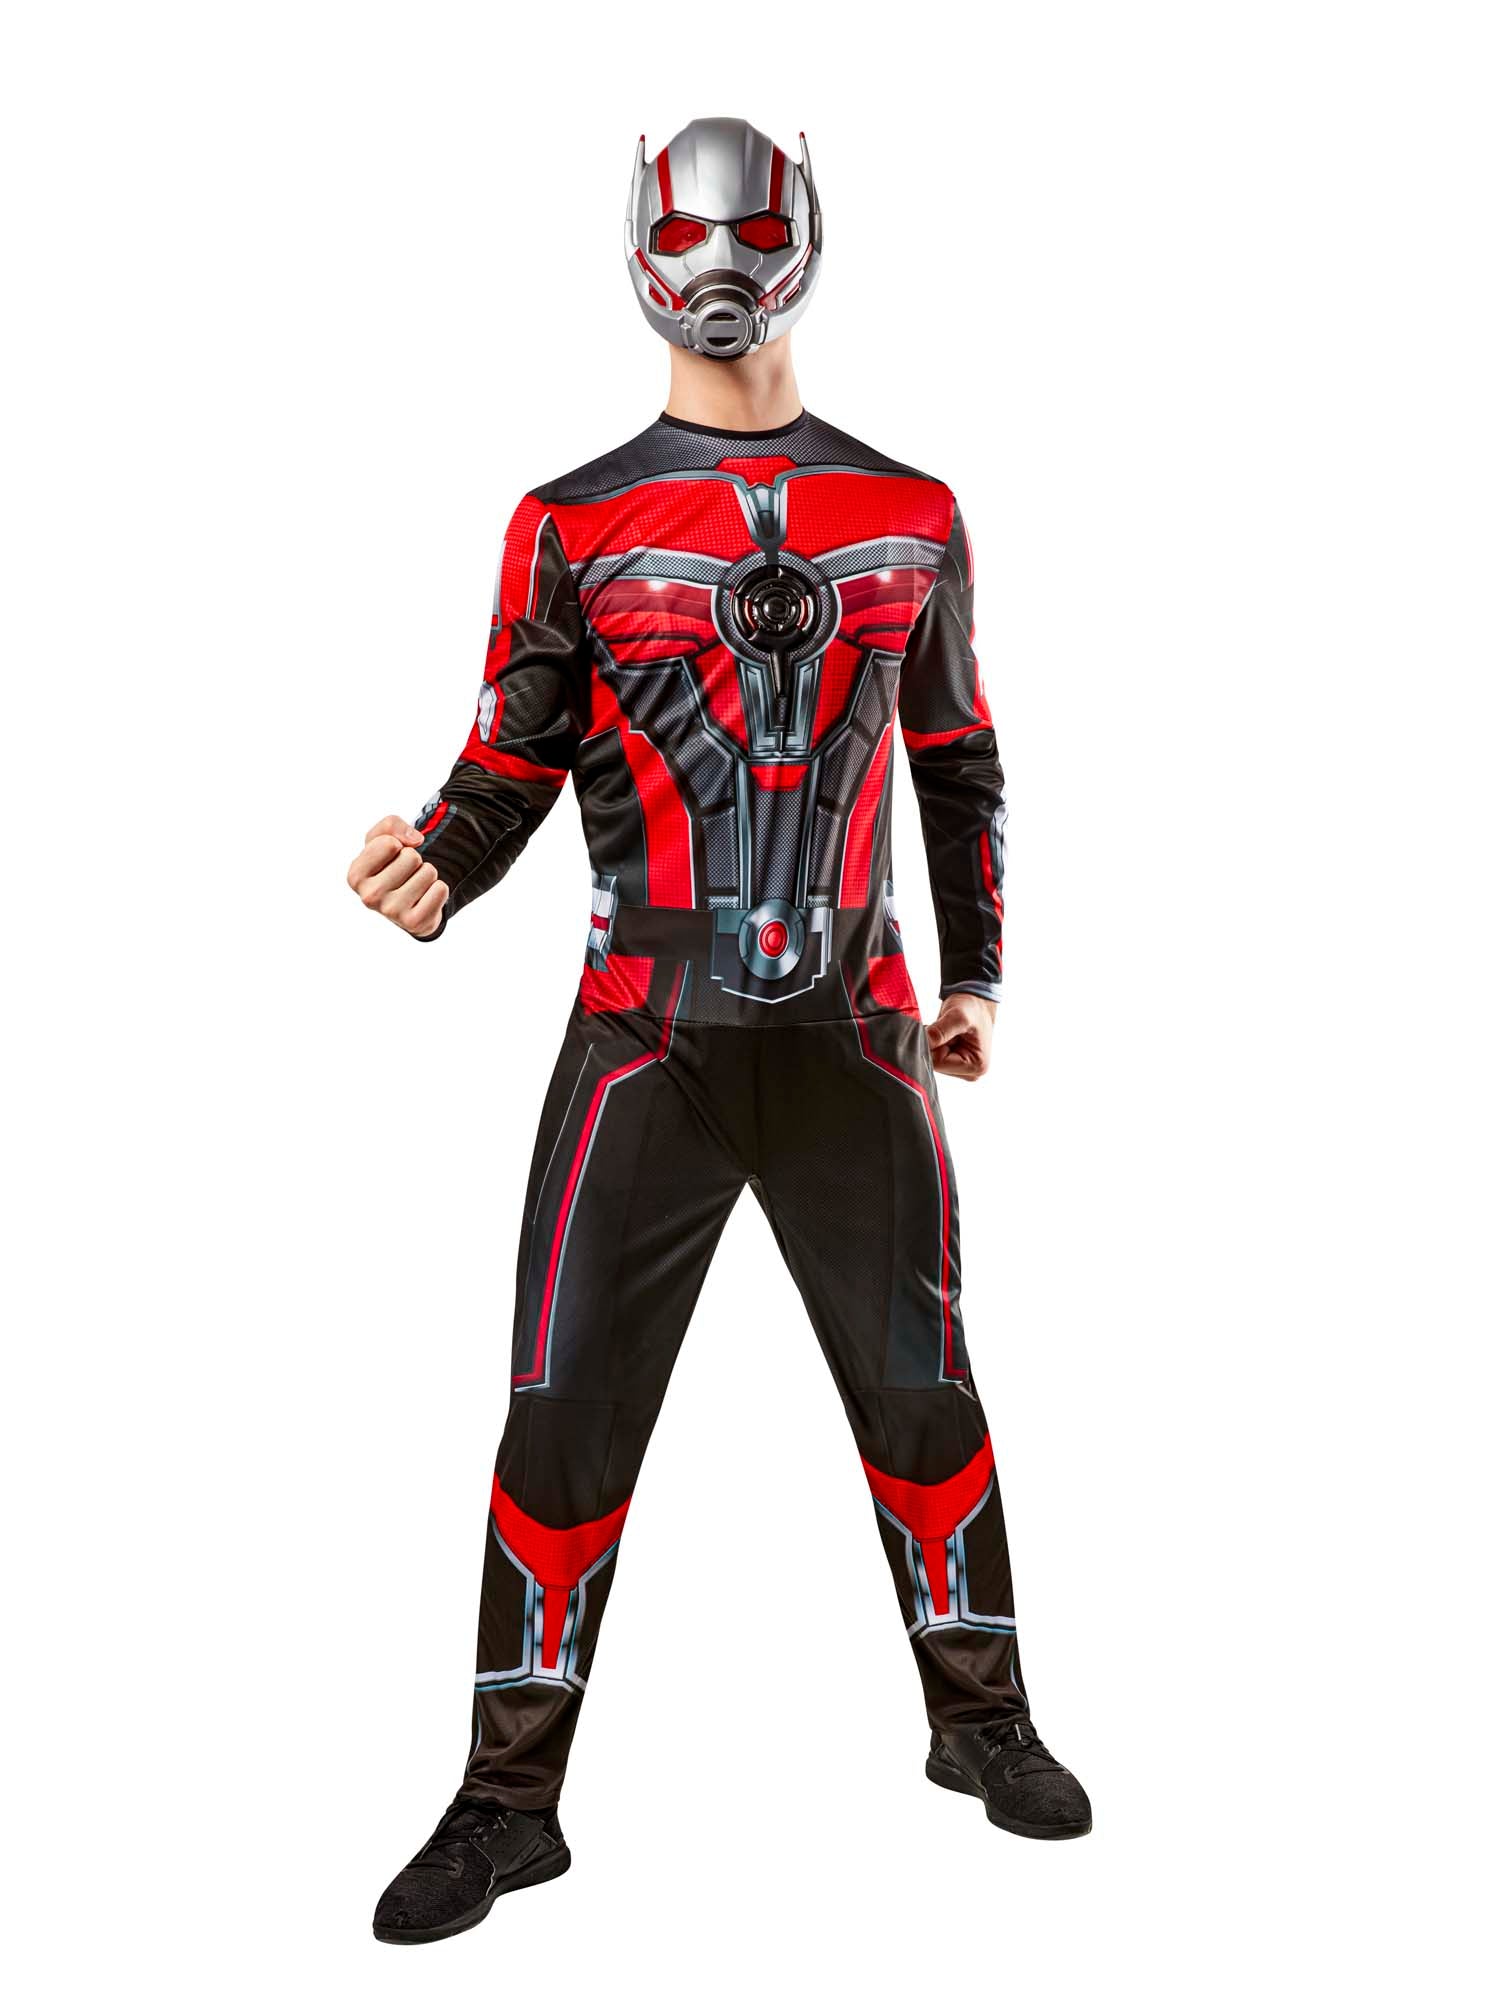 Ant-man, Ant-Man and the Wasp: Quantomania, Ant-Man Quantumania, Ant-Man and the Wasp: Quantomania, Marvel, Adult Costumes, Large, Front